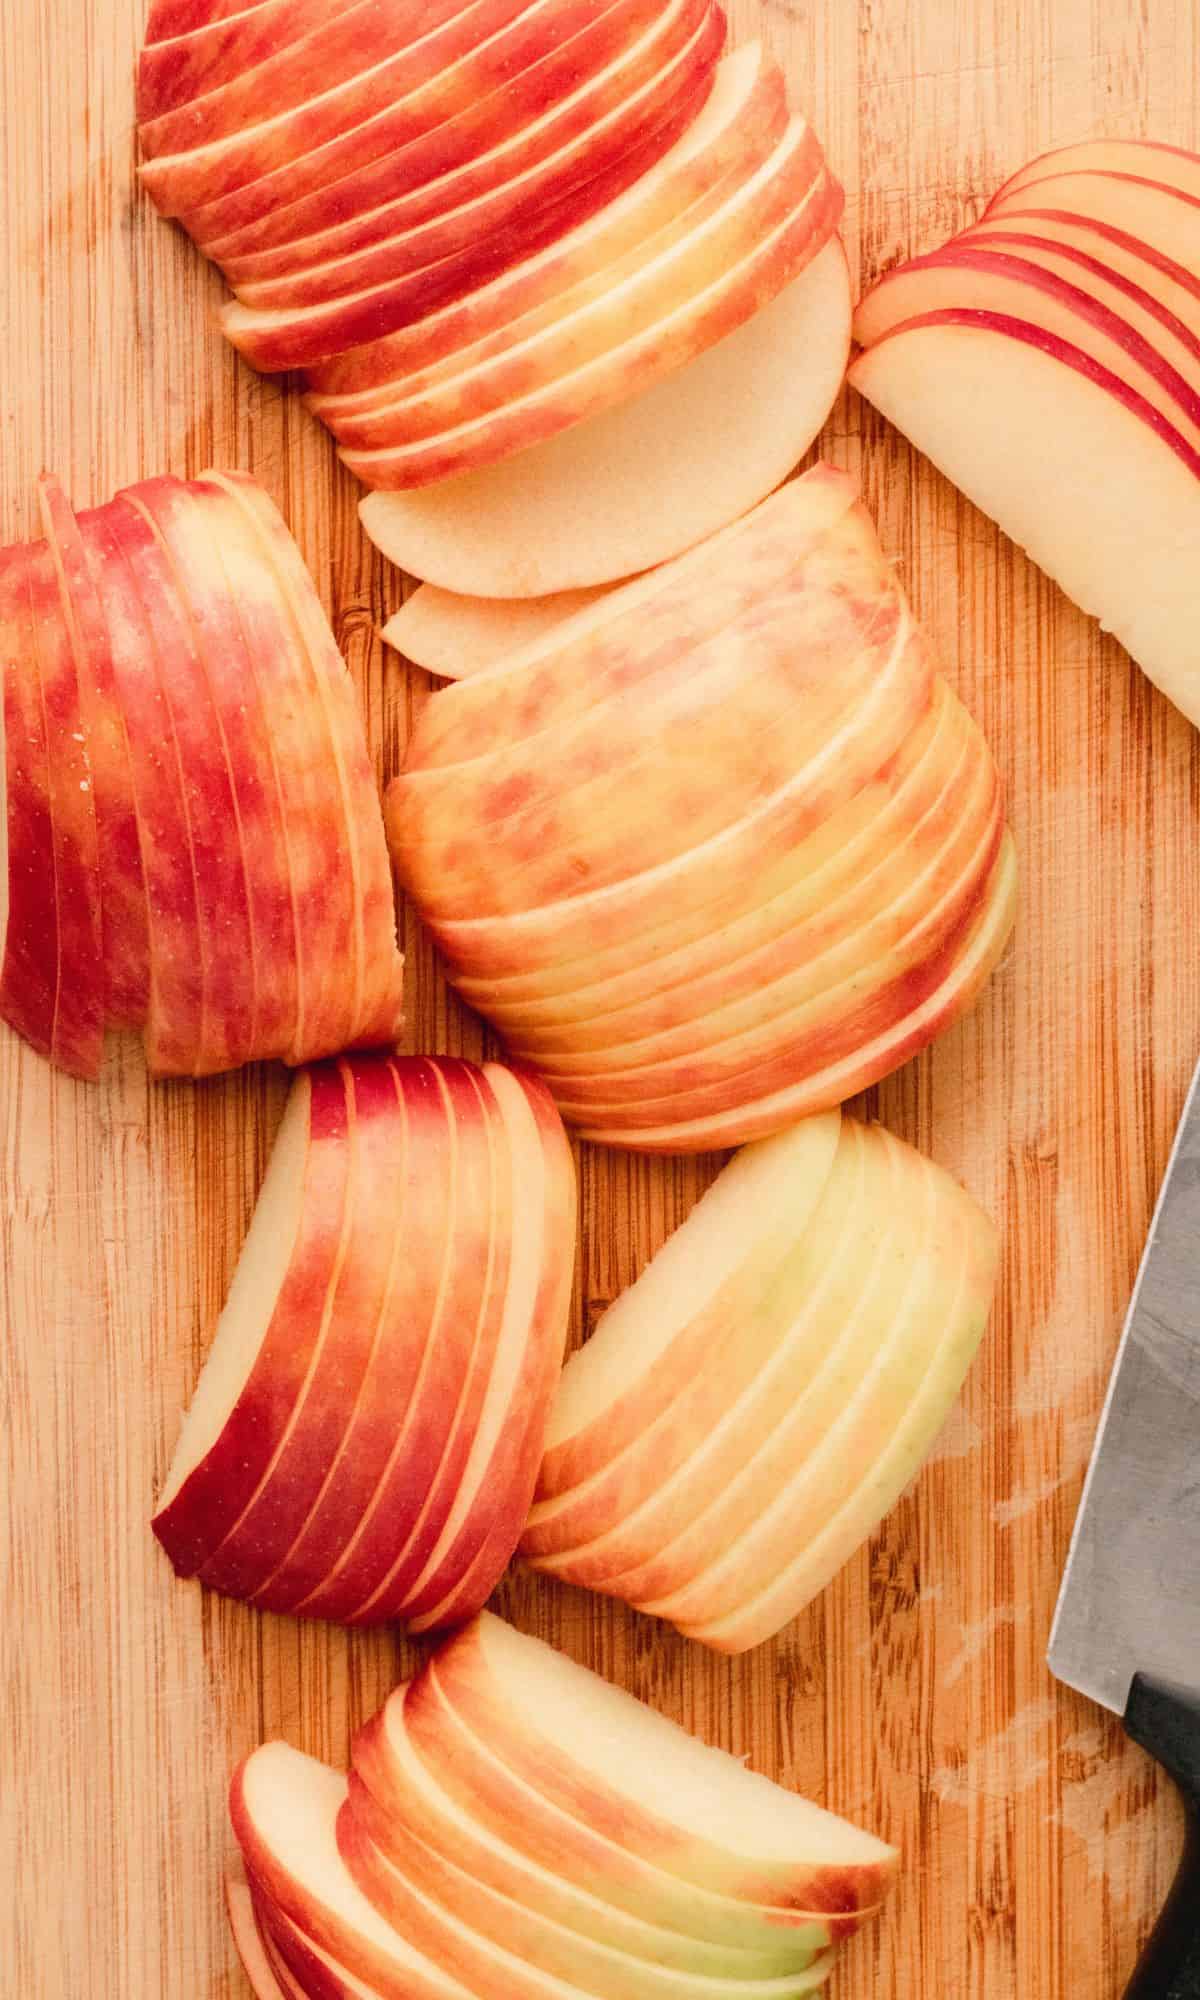 Apple preparation for roasted apple and chicken panini.